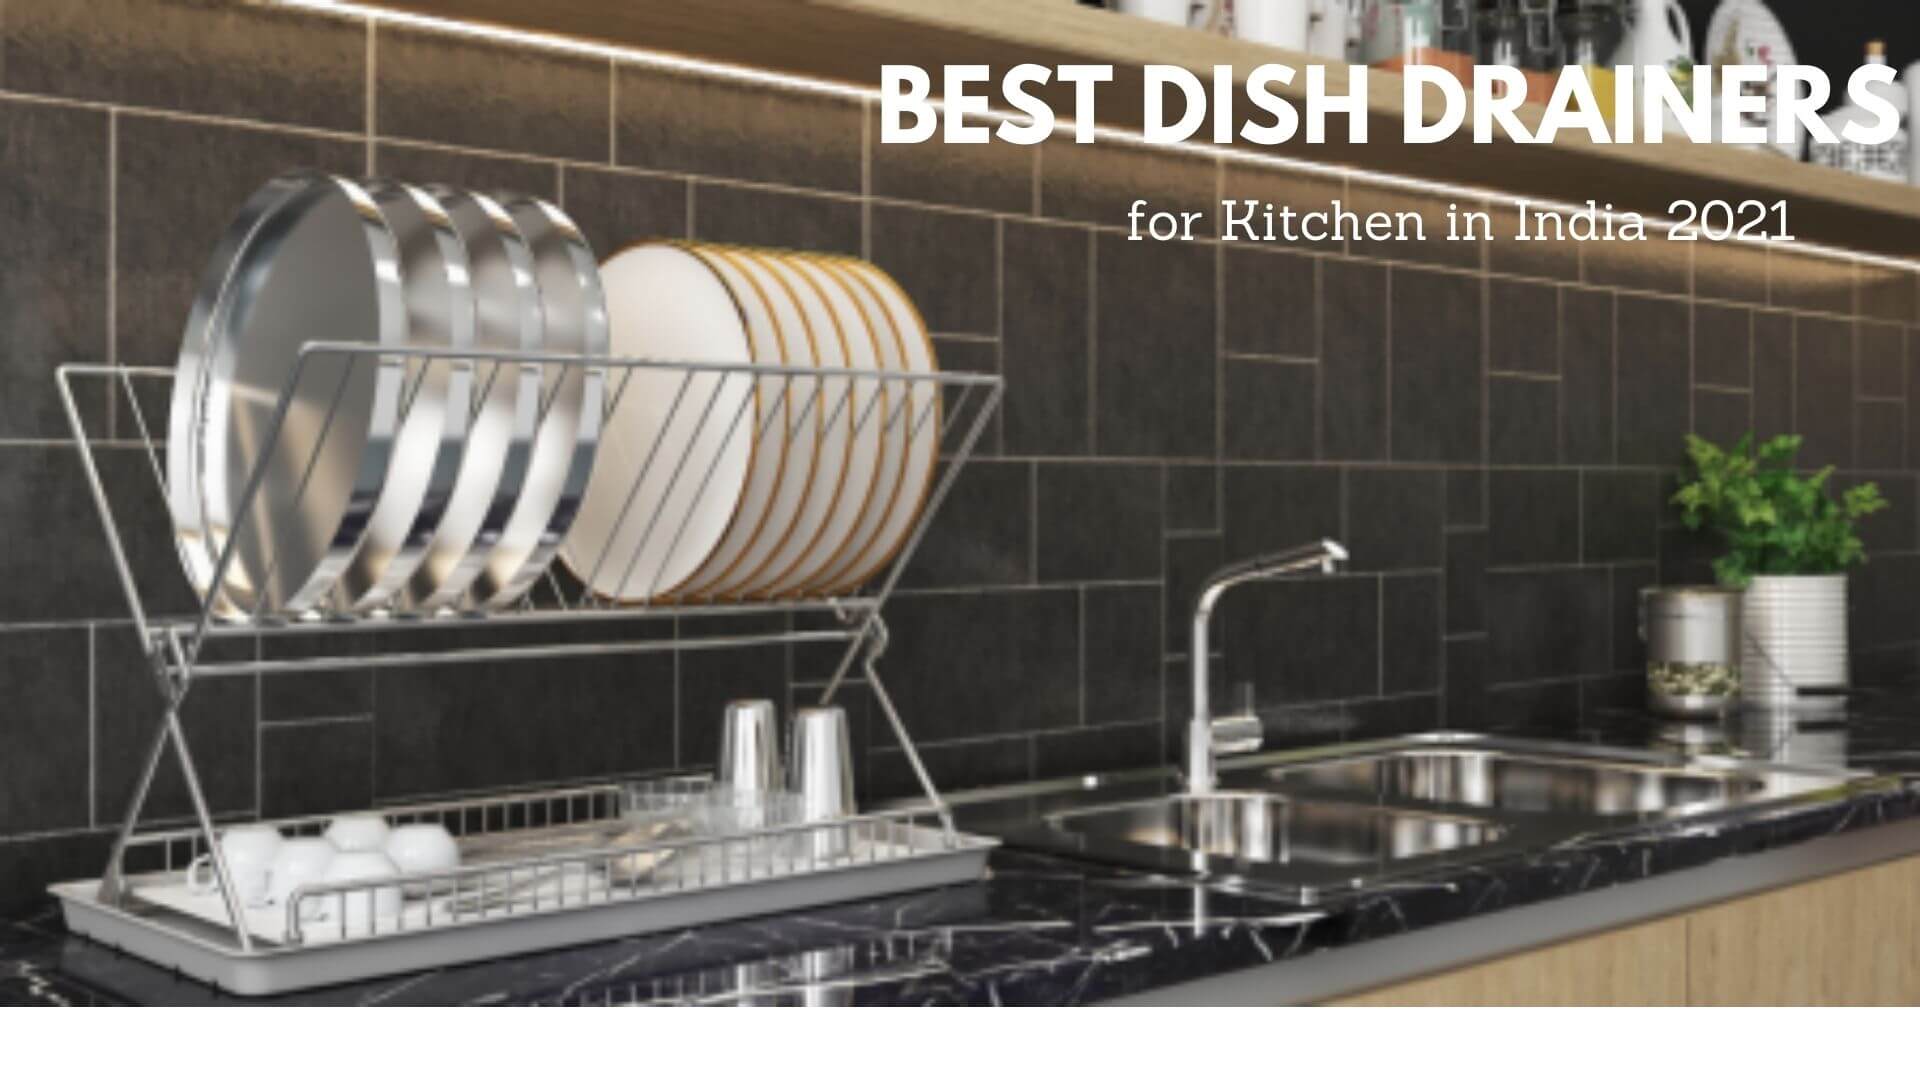 4 Best Dish Drainers for Kitchen in India 2021 – Buying Tips & Review